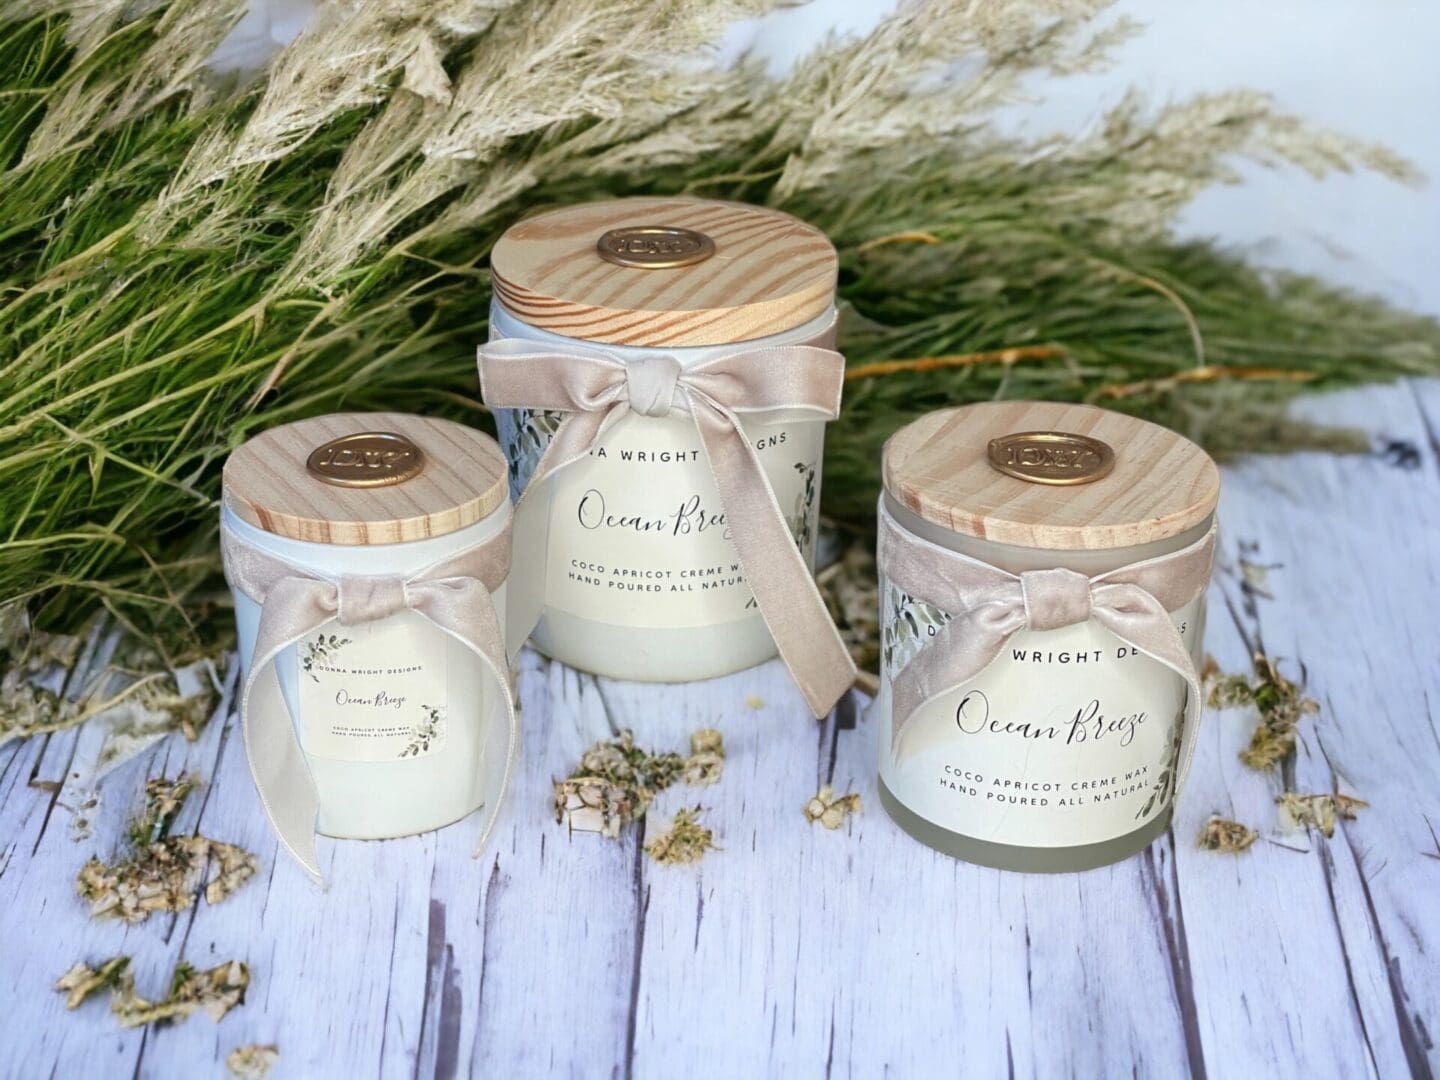 Donna Wright Designs Three elegant jars of Ocean Breeze Candles apricot crème body butter, presented on a wooden surface against a backdrop of dried grass and a soft blue background, evoking the calming essence of home fragrance.